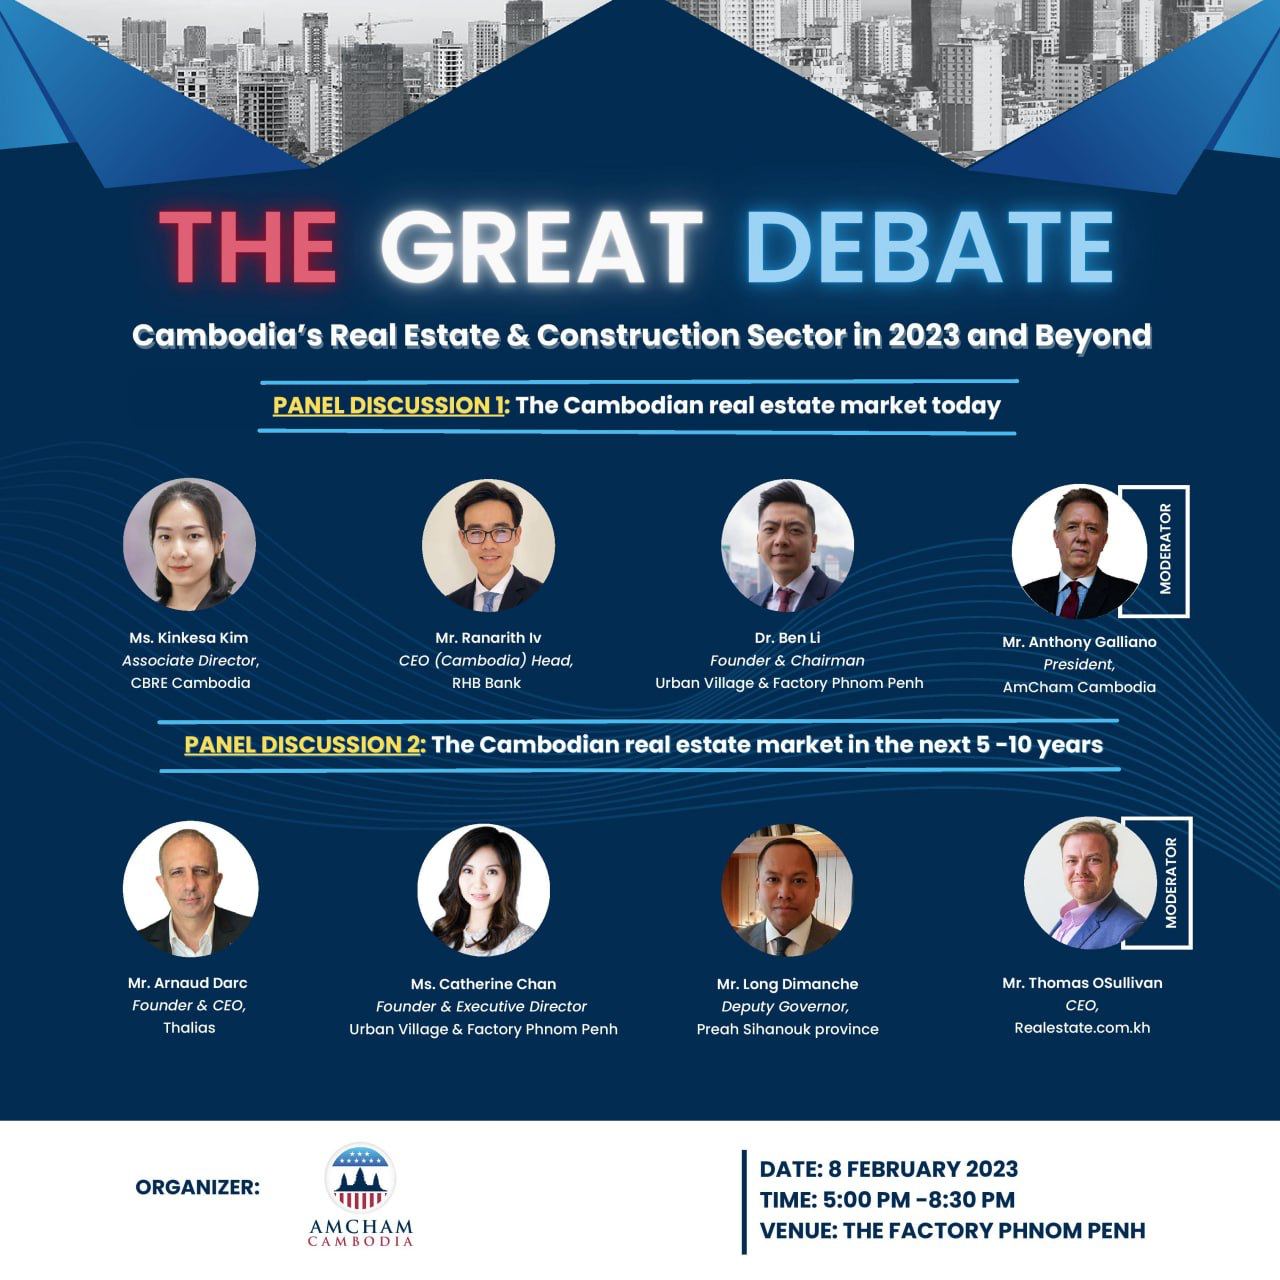 The Great Debate - Cambodia's Real Estate & Construction Sector 2023 & Beyond